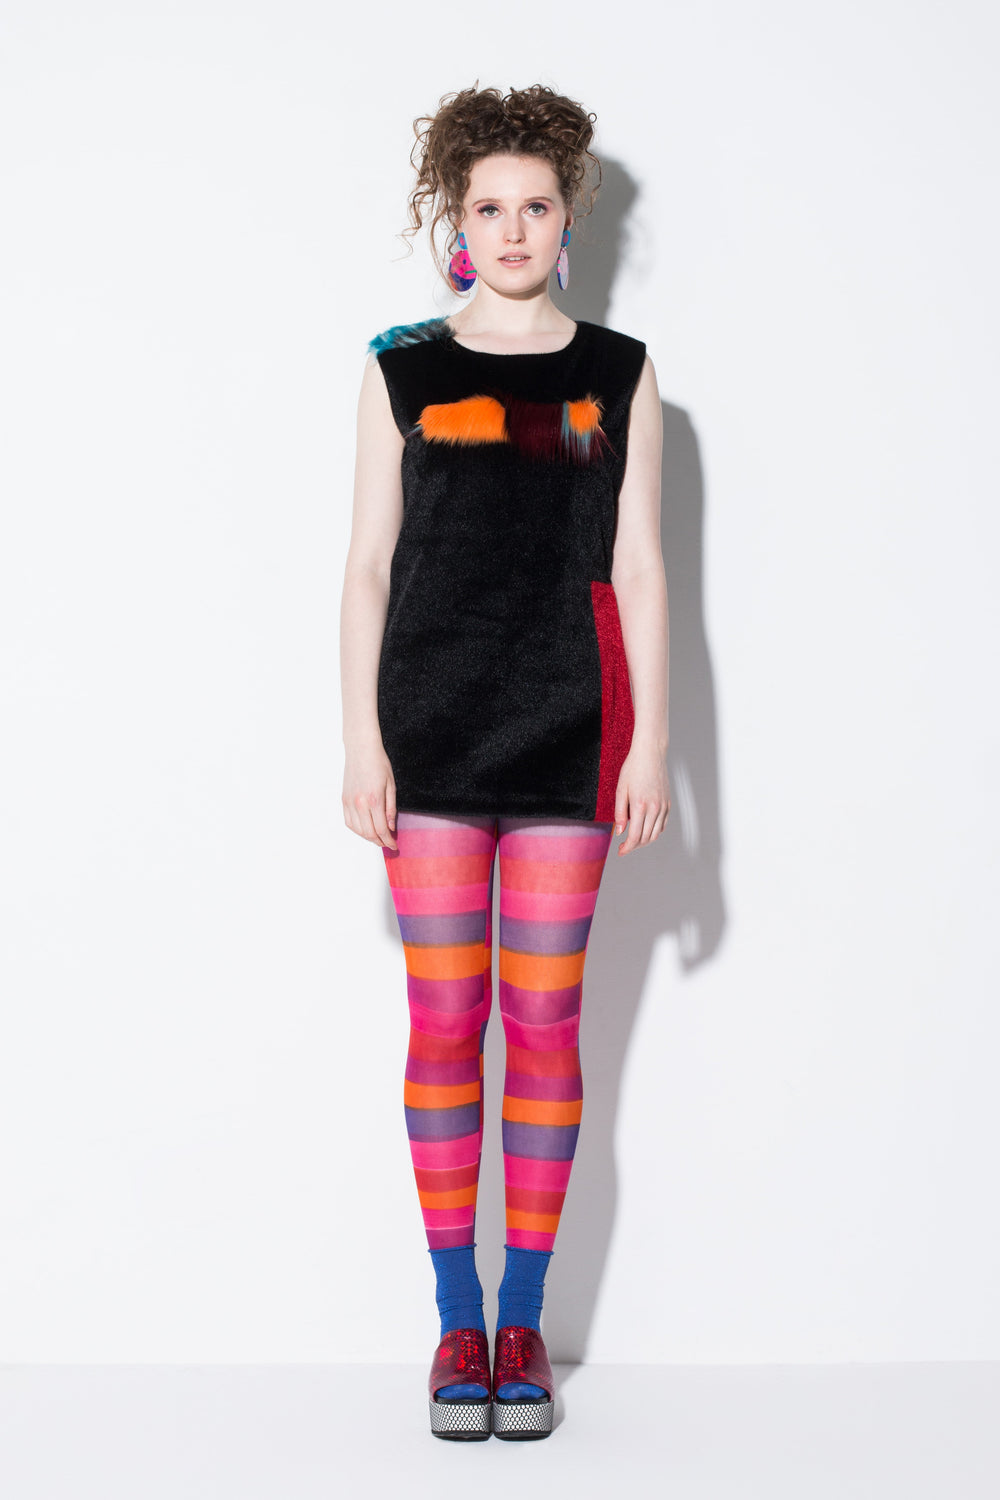 day meets night|a key piece faux fur mid-length vest in black orange and blue colour-way from jin & yin front view